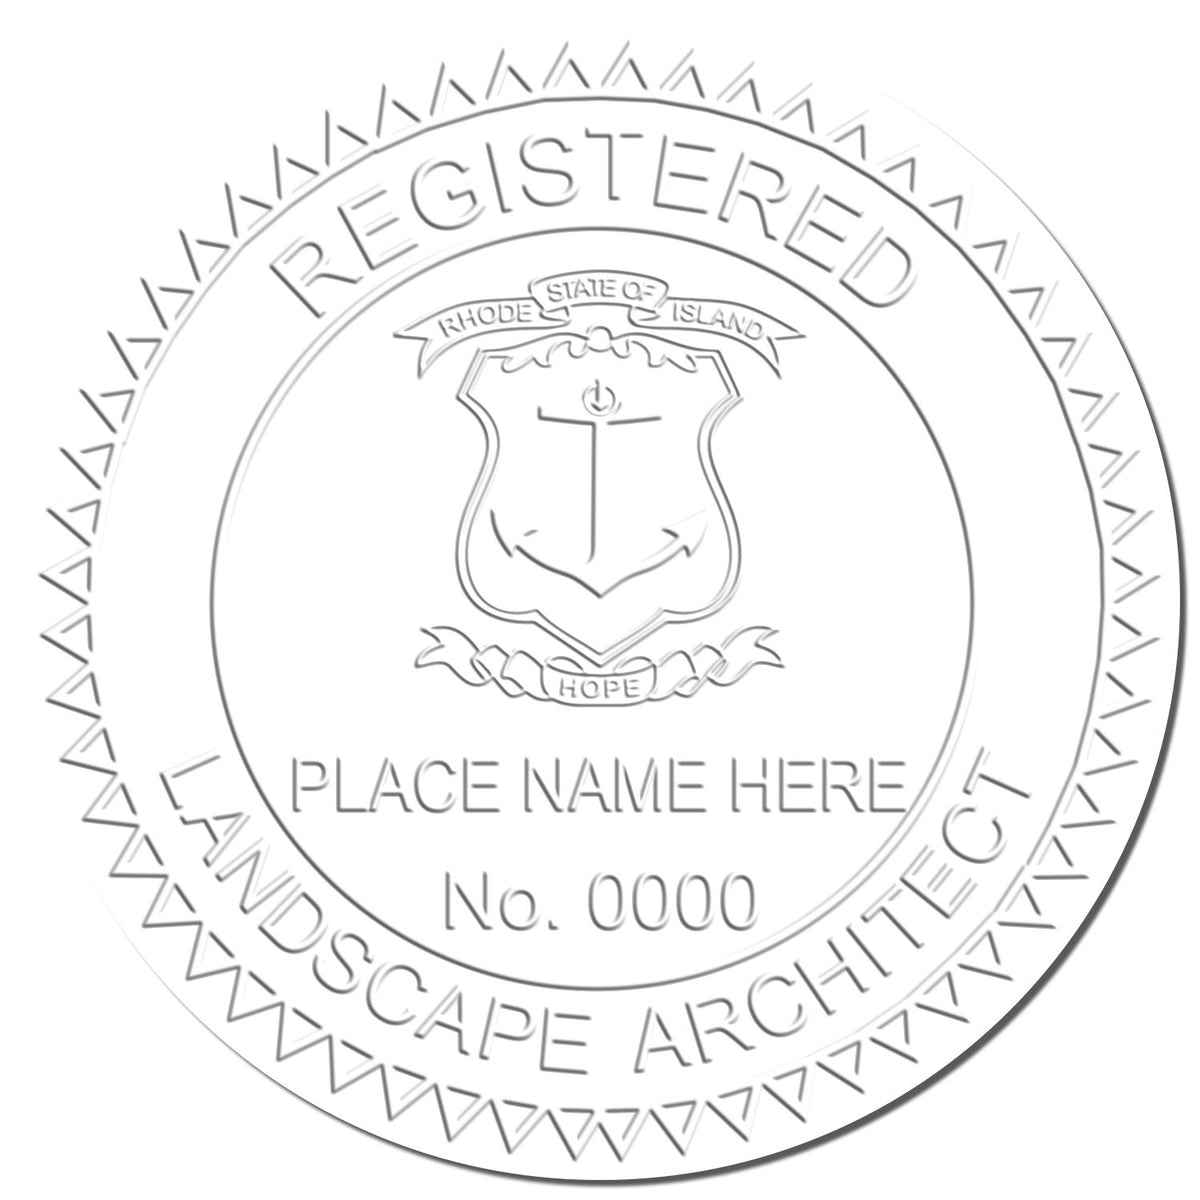 This paper is stamped with a sample imprint of the Gift Rhode Island Landscape Architect Seal, signifying its quality and reliability.